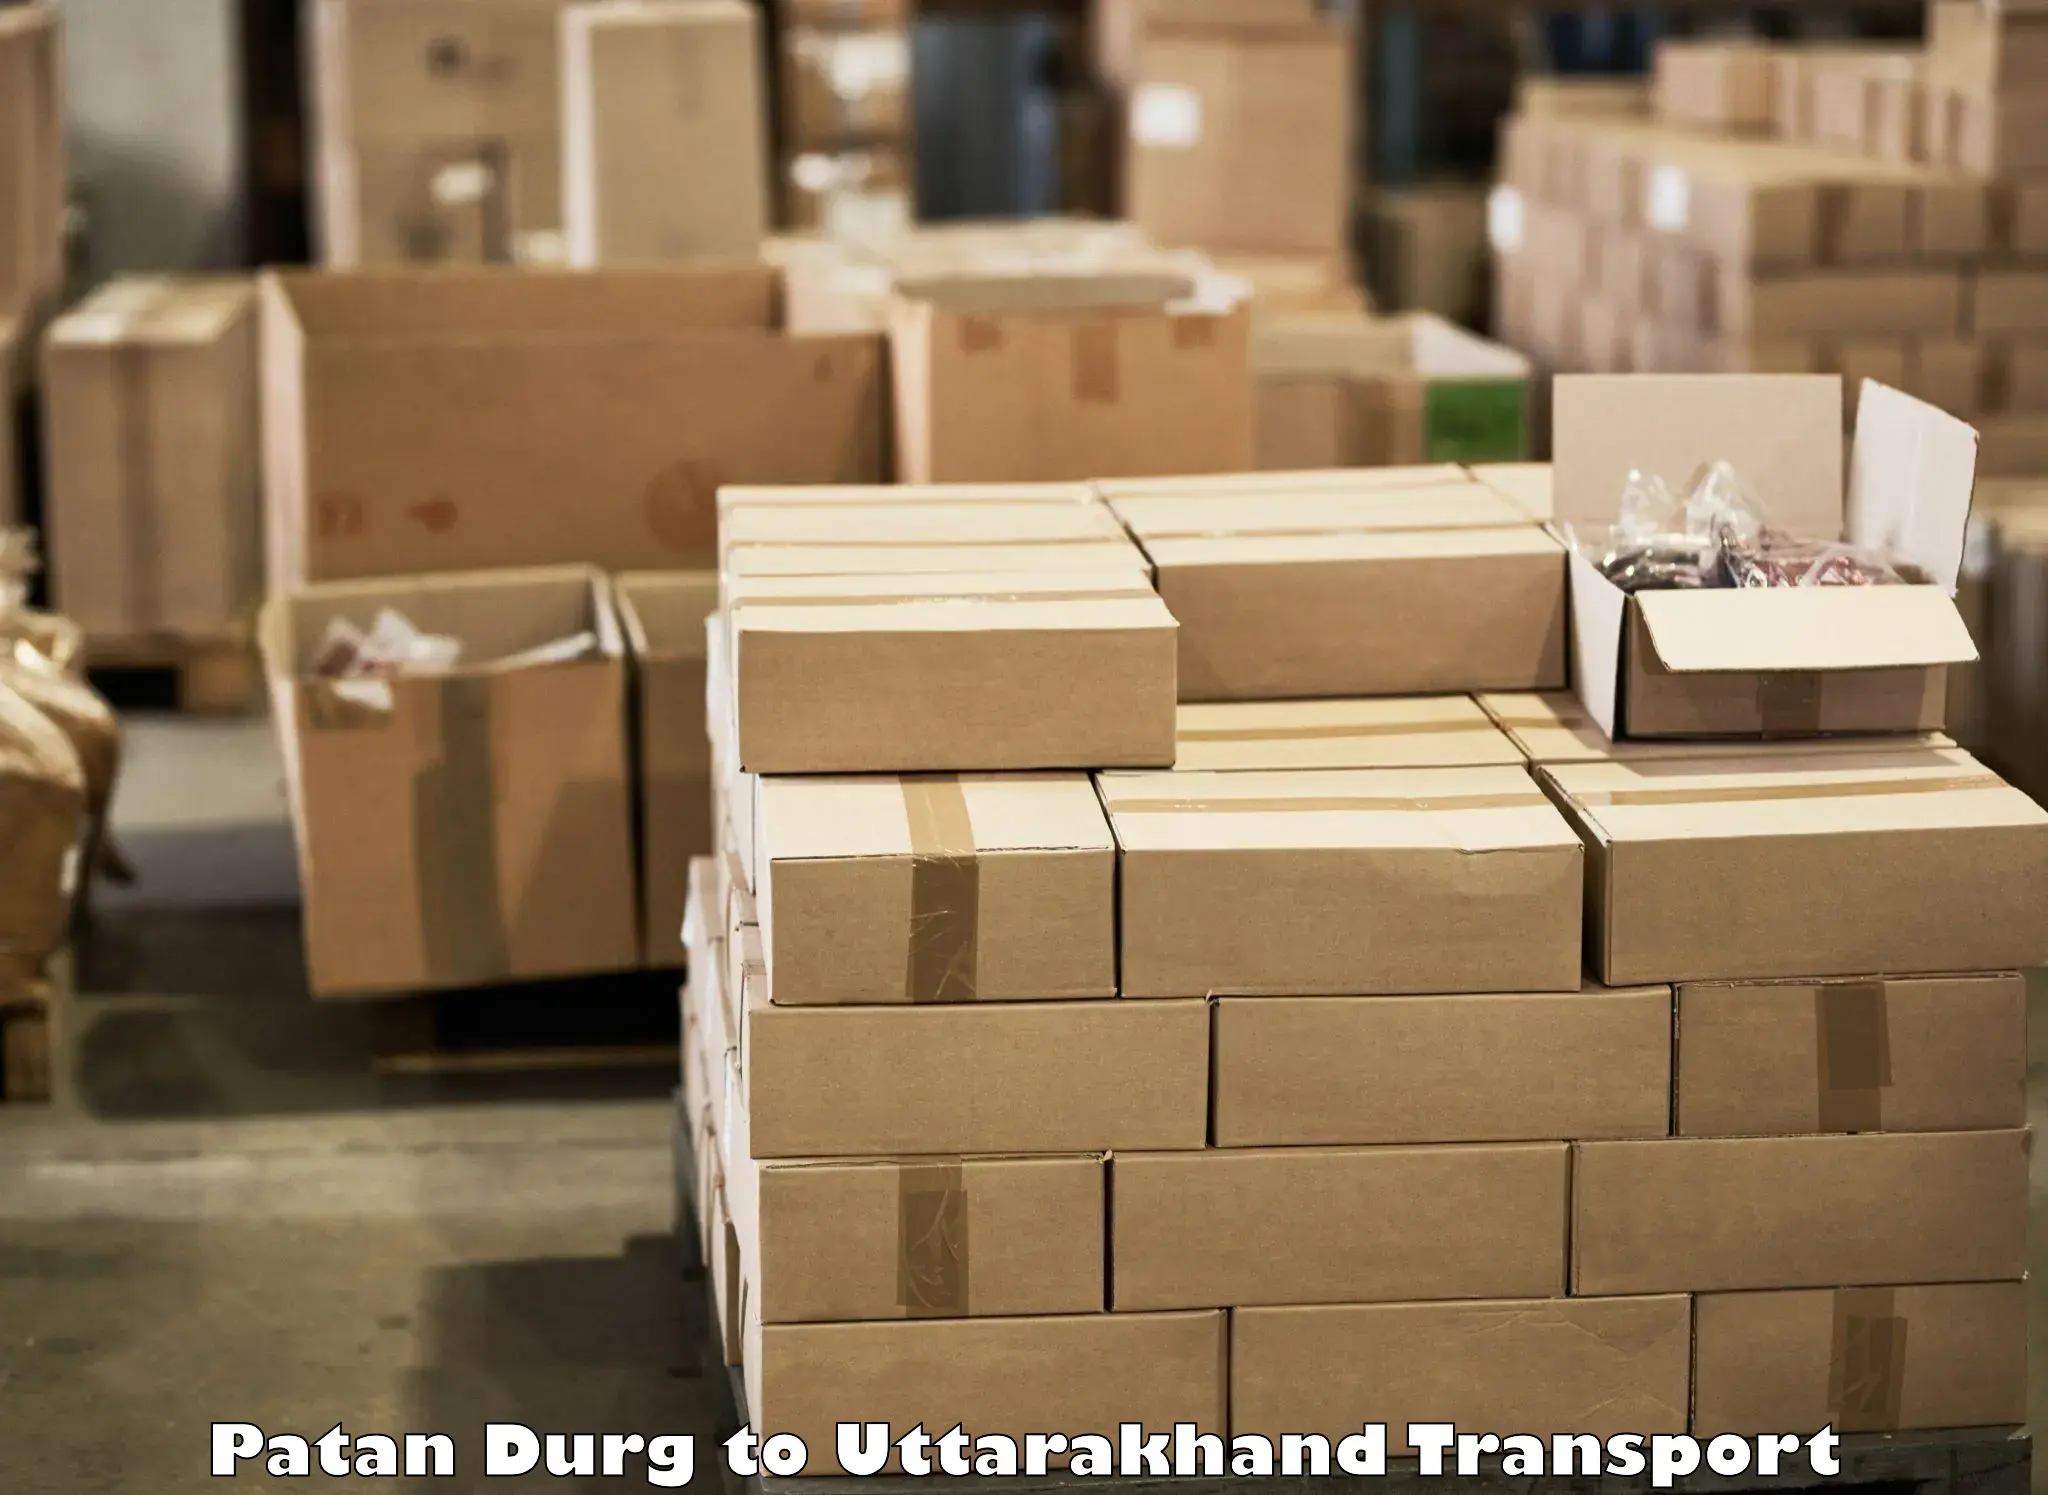 Truck transport companies in India in Patan Durg to Haridwar